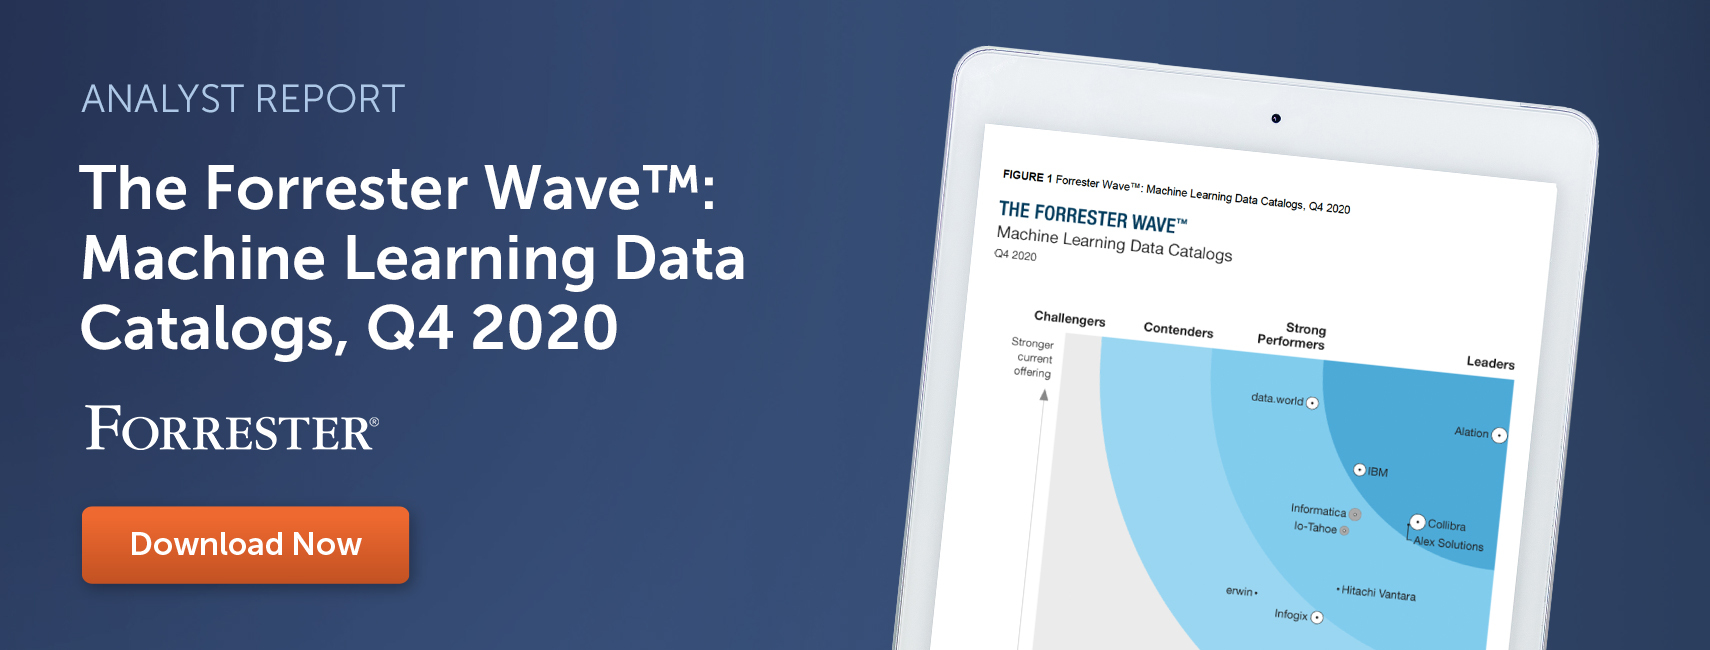 Alation is the Clear Leader in The Forrester Wave™: Machine Learning Data Catalogs, Q4 2020